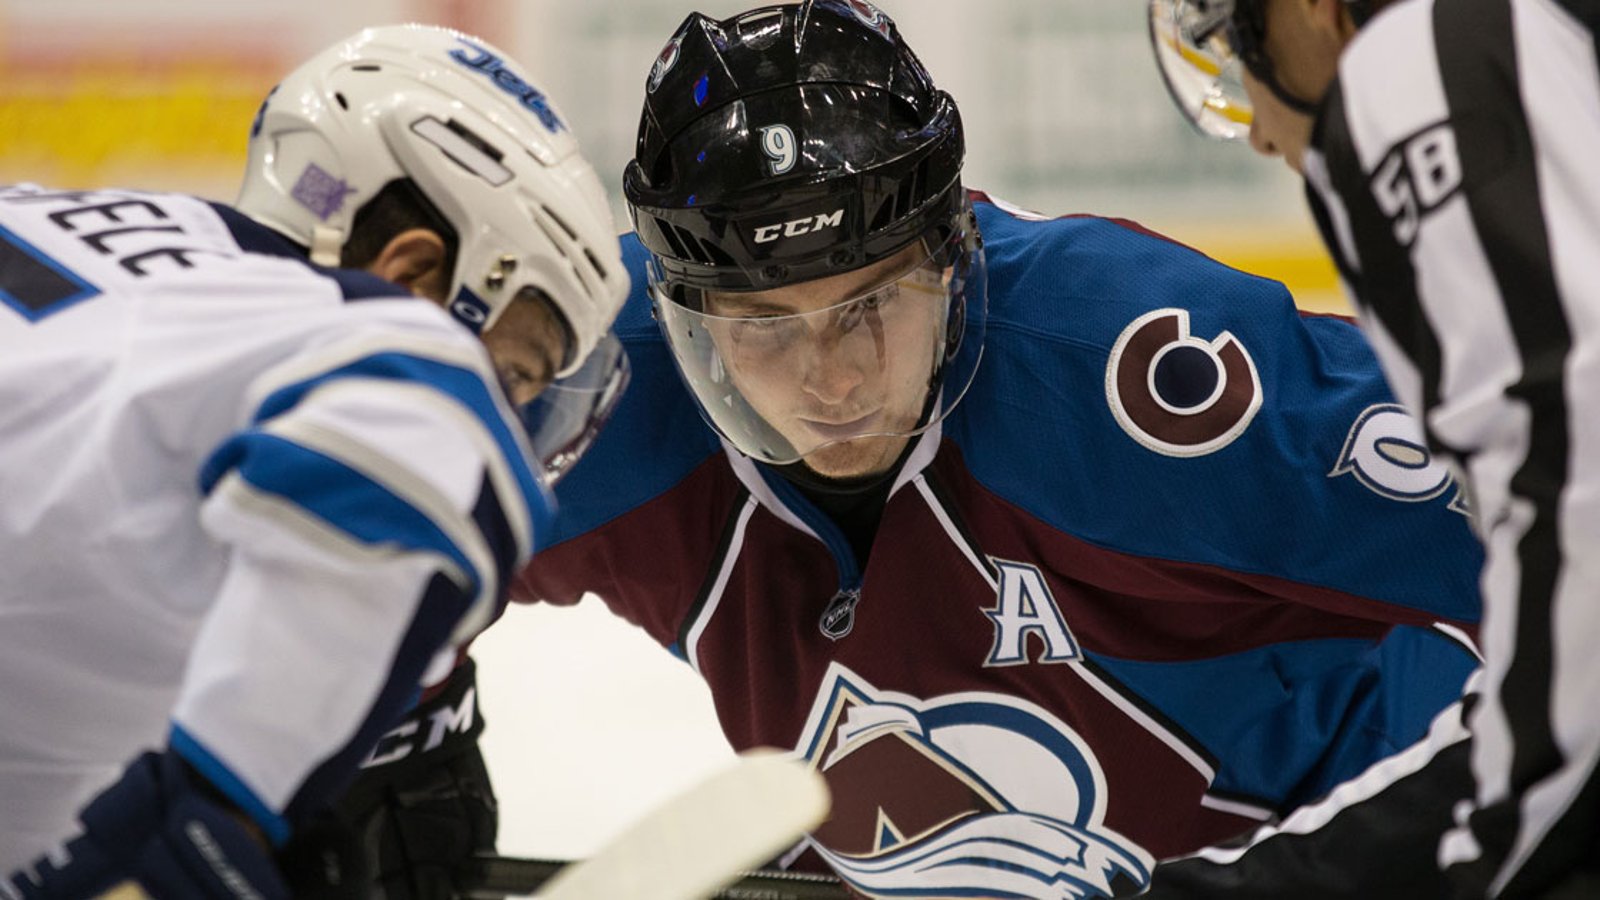 Breaking: We know exactly what the Avalanche wanted for Duchene!